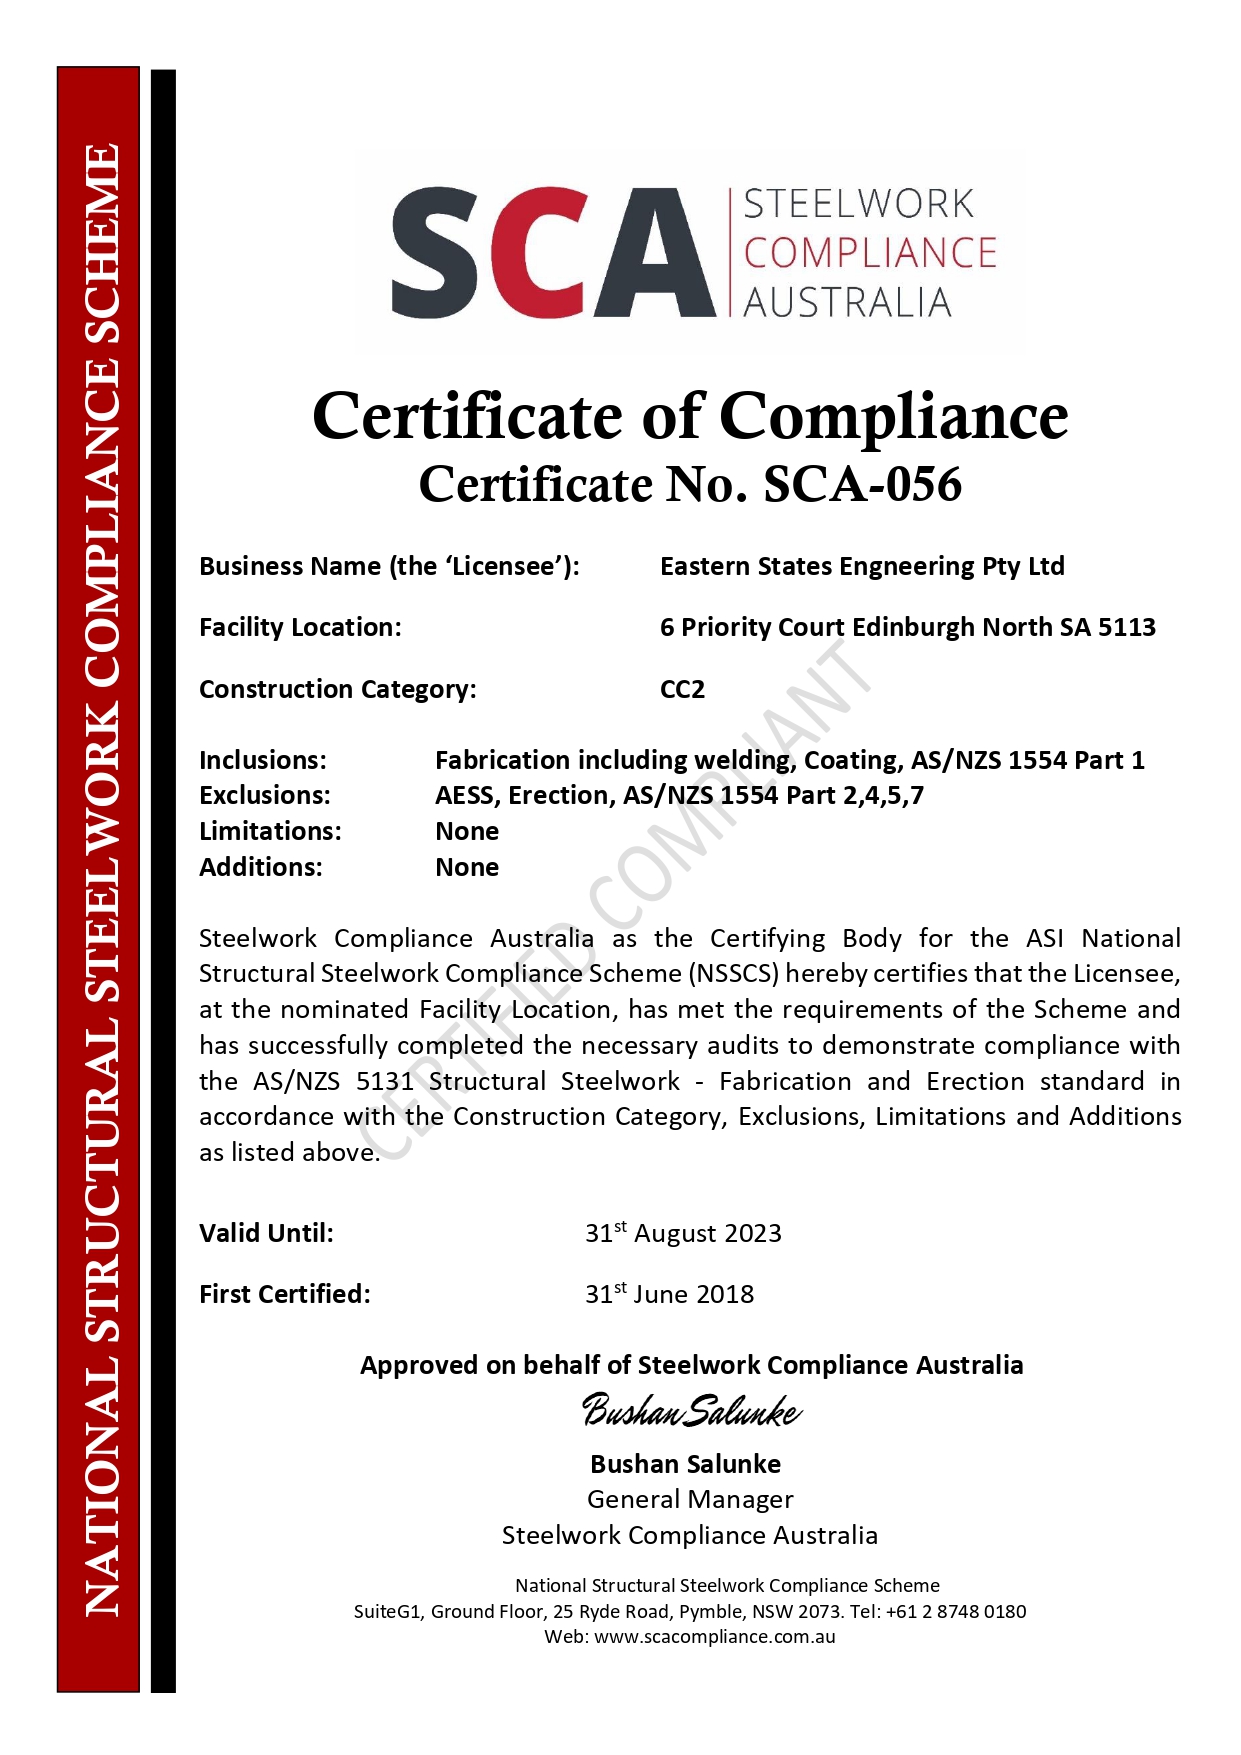 SCA-056 CC2 Certificate of Compliance ESE Adelaide 31-08-2023_page-0001